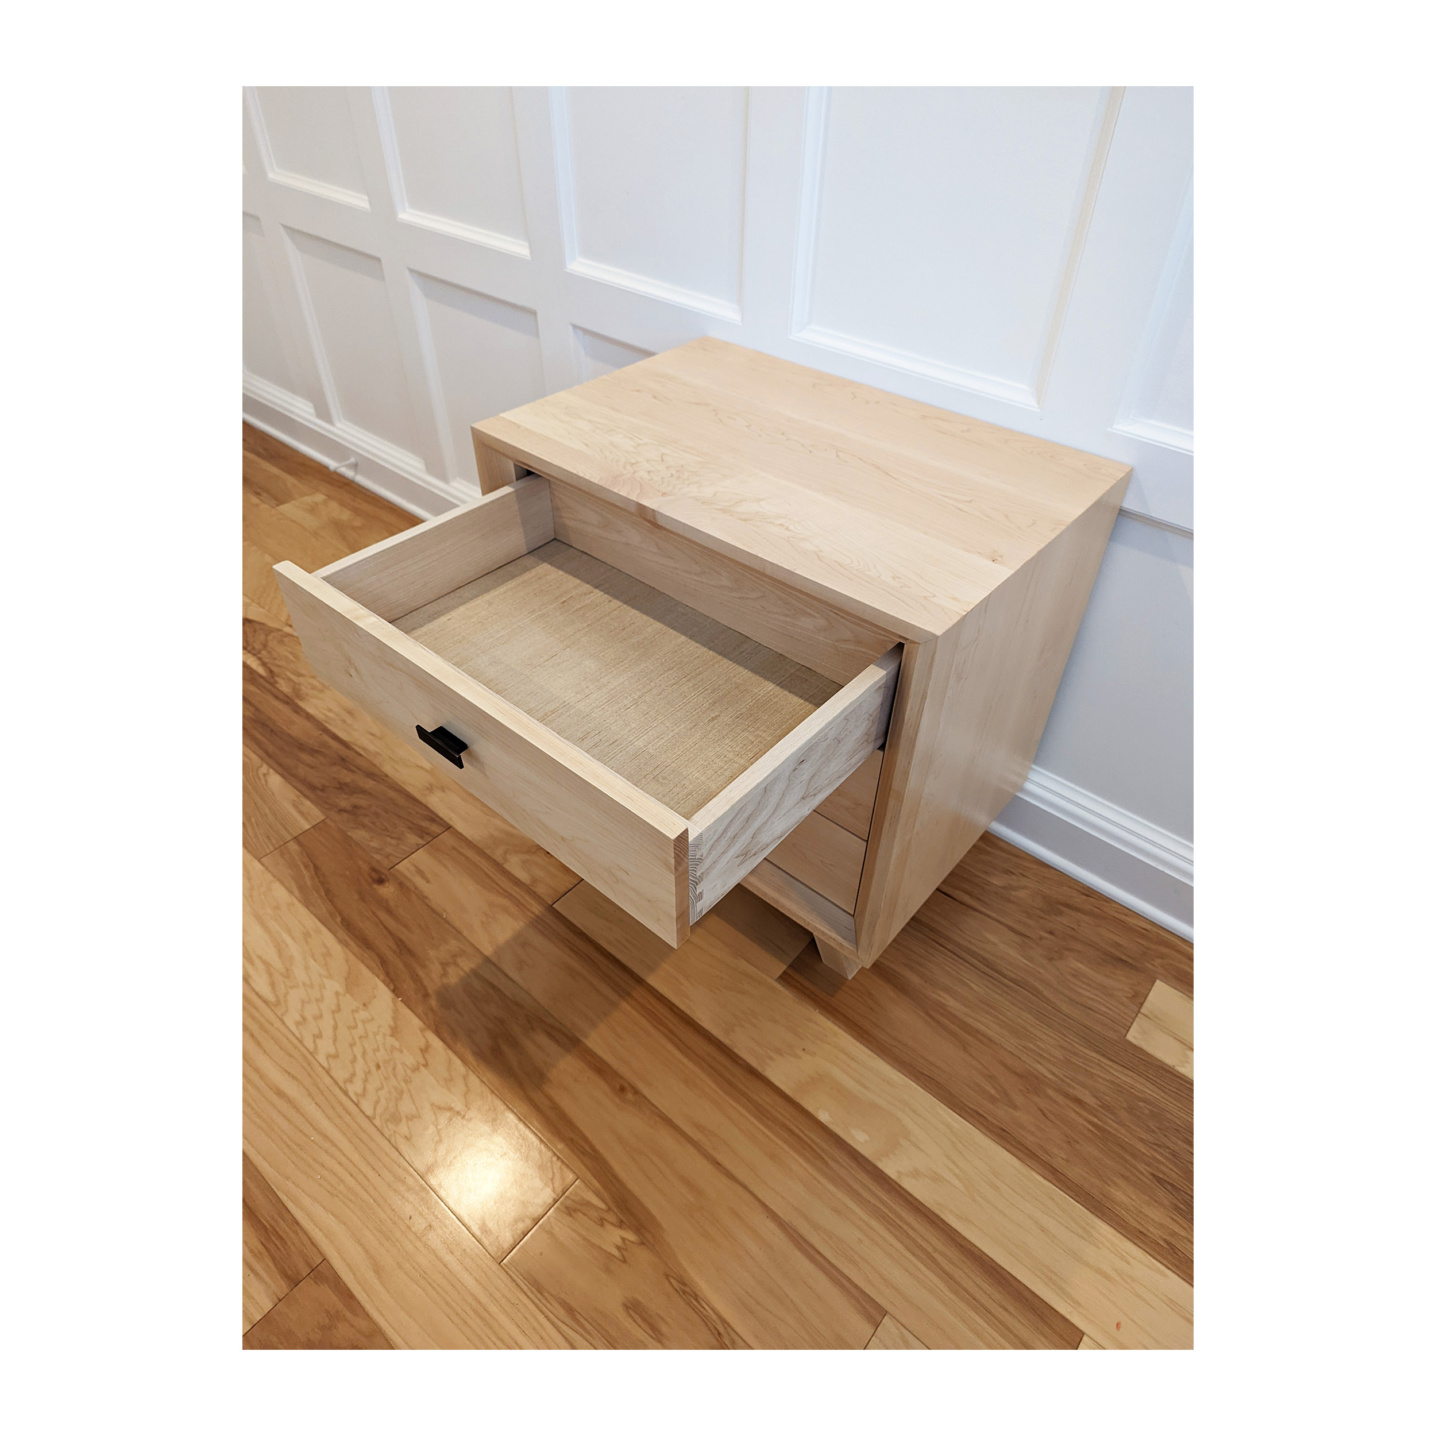 Ash drawers for nightstand